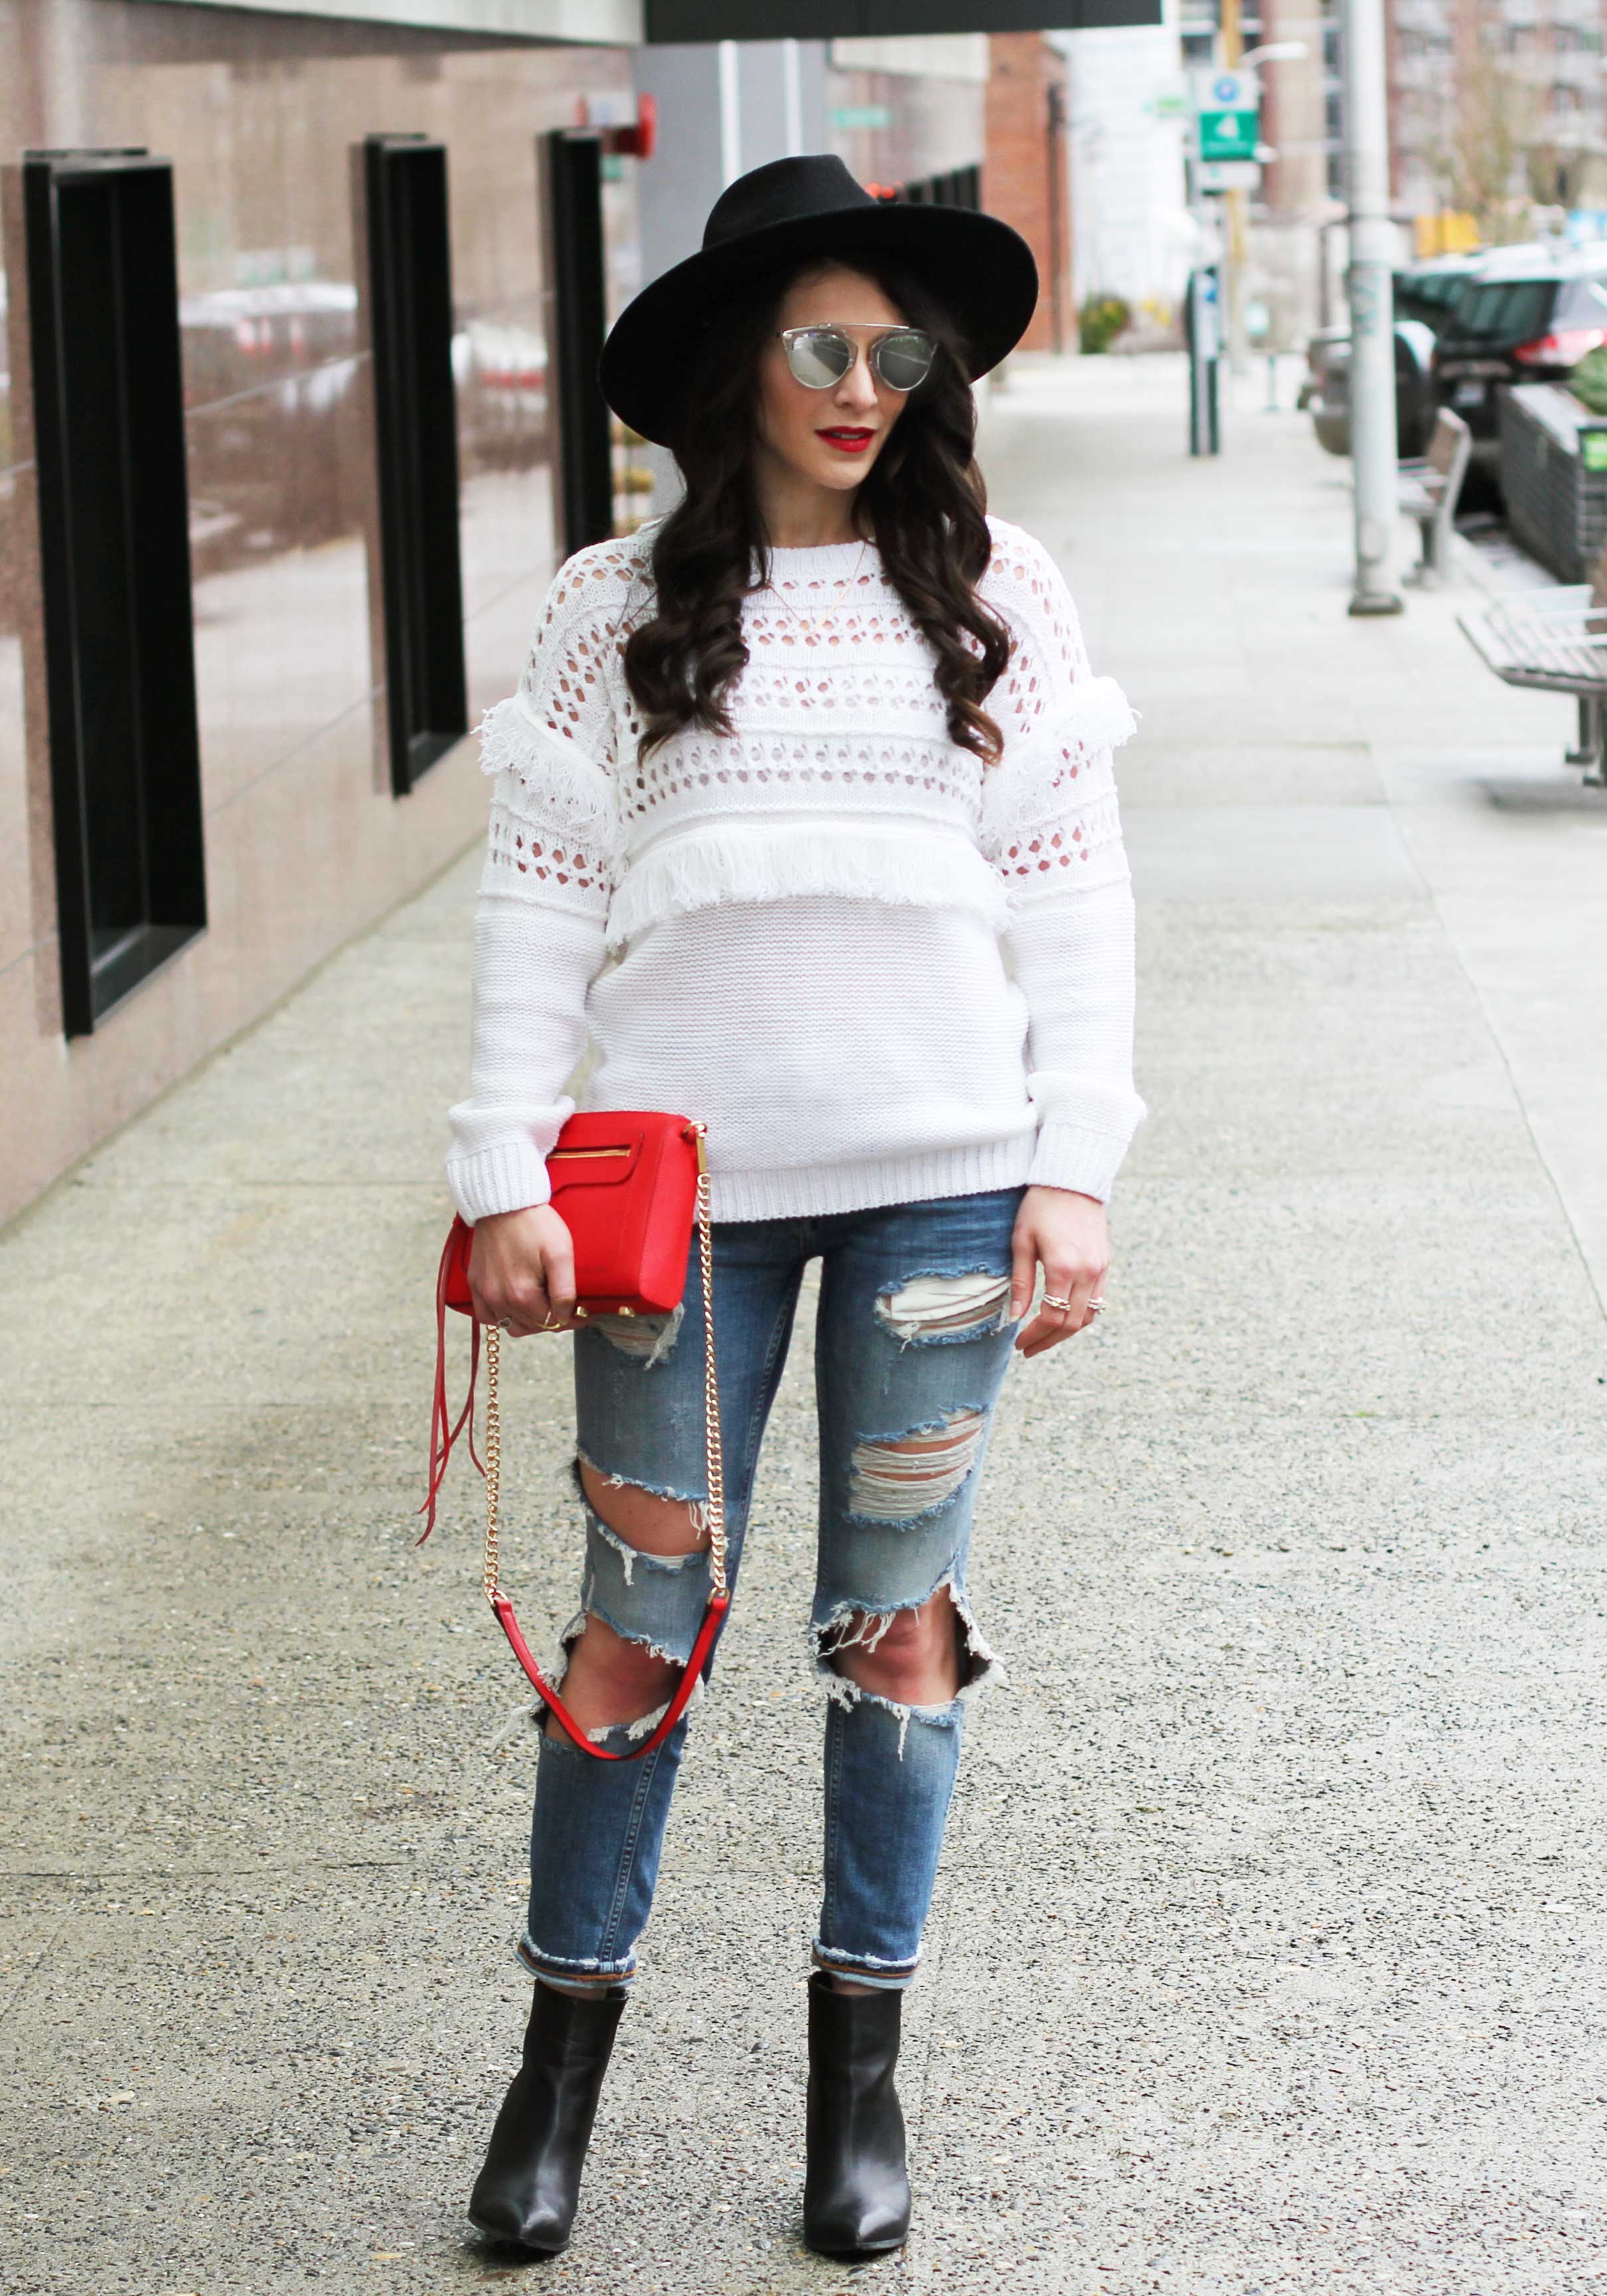 Winter Outfit, JOA Openwork Pullover Fringe Sweater, Destroyed Skinny Jeans, Seychelles 'Accordian' Booties, Brixton Mayfield II Hat, Dior Look Alike Sunglasses, Red Rebecca Minkoff 'Avery' Crossbody